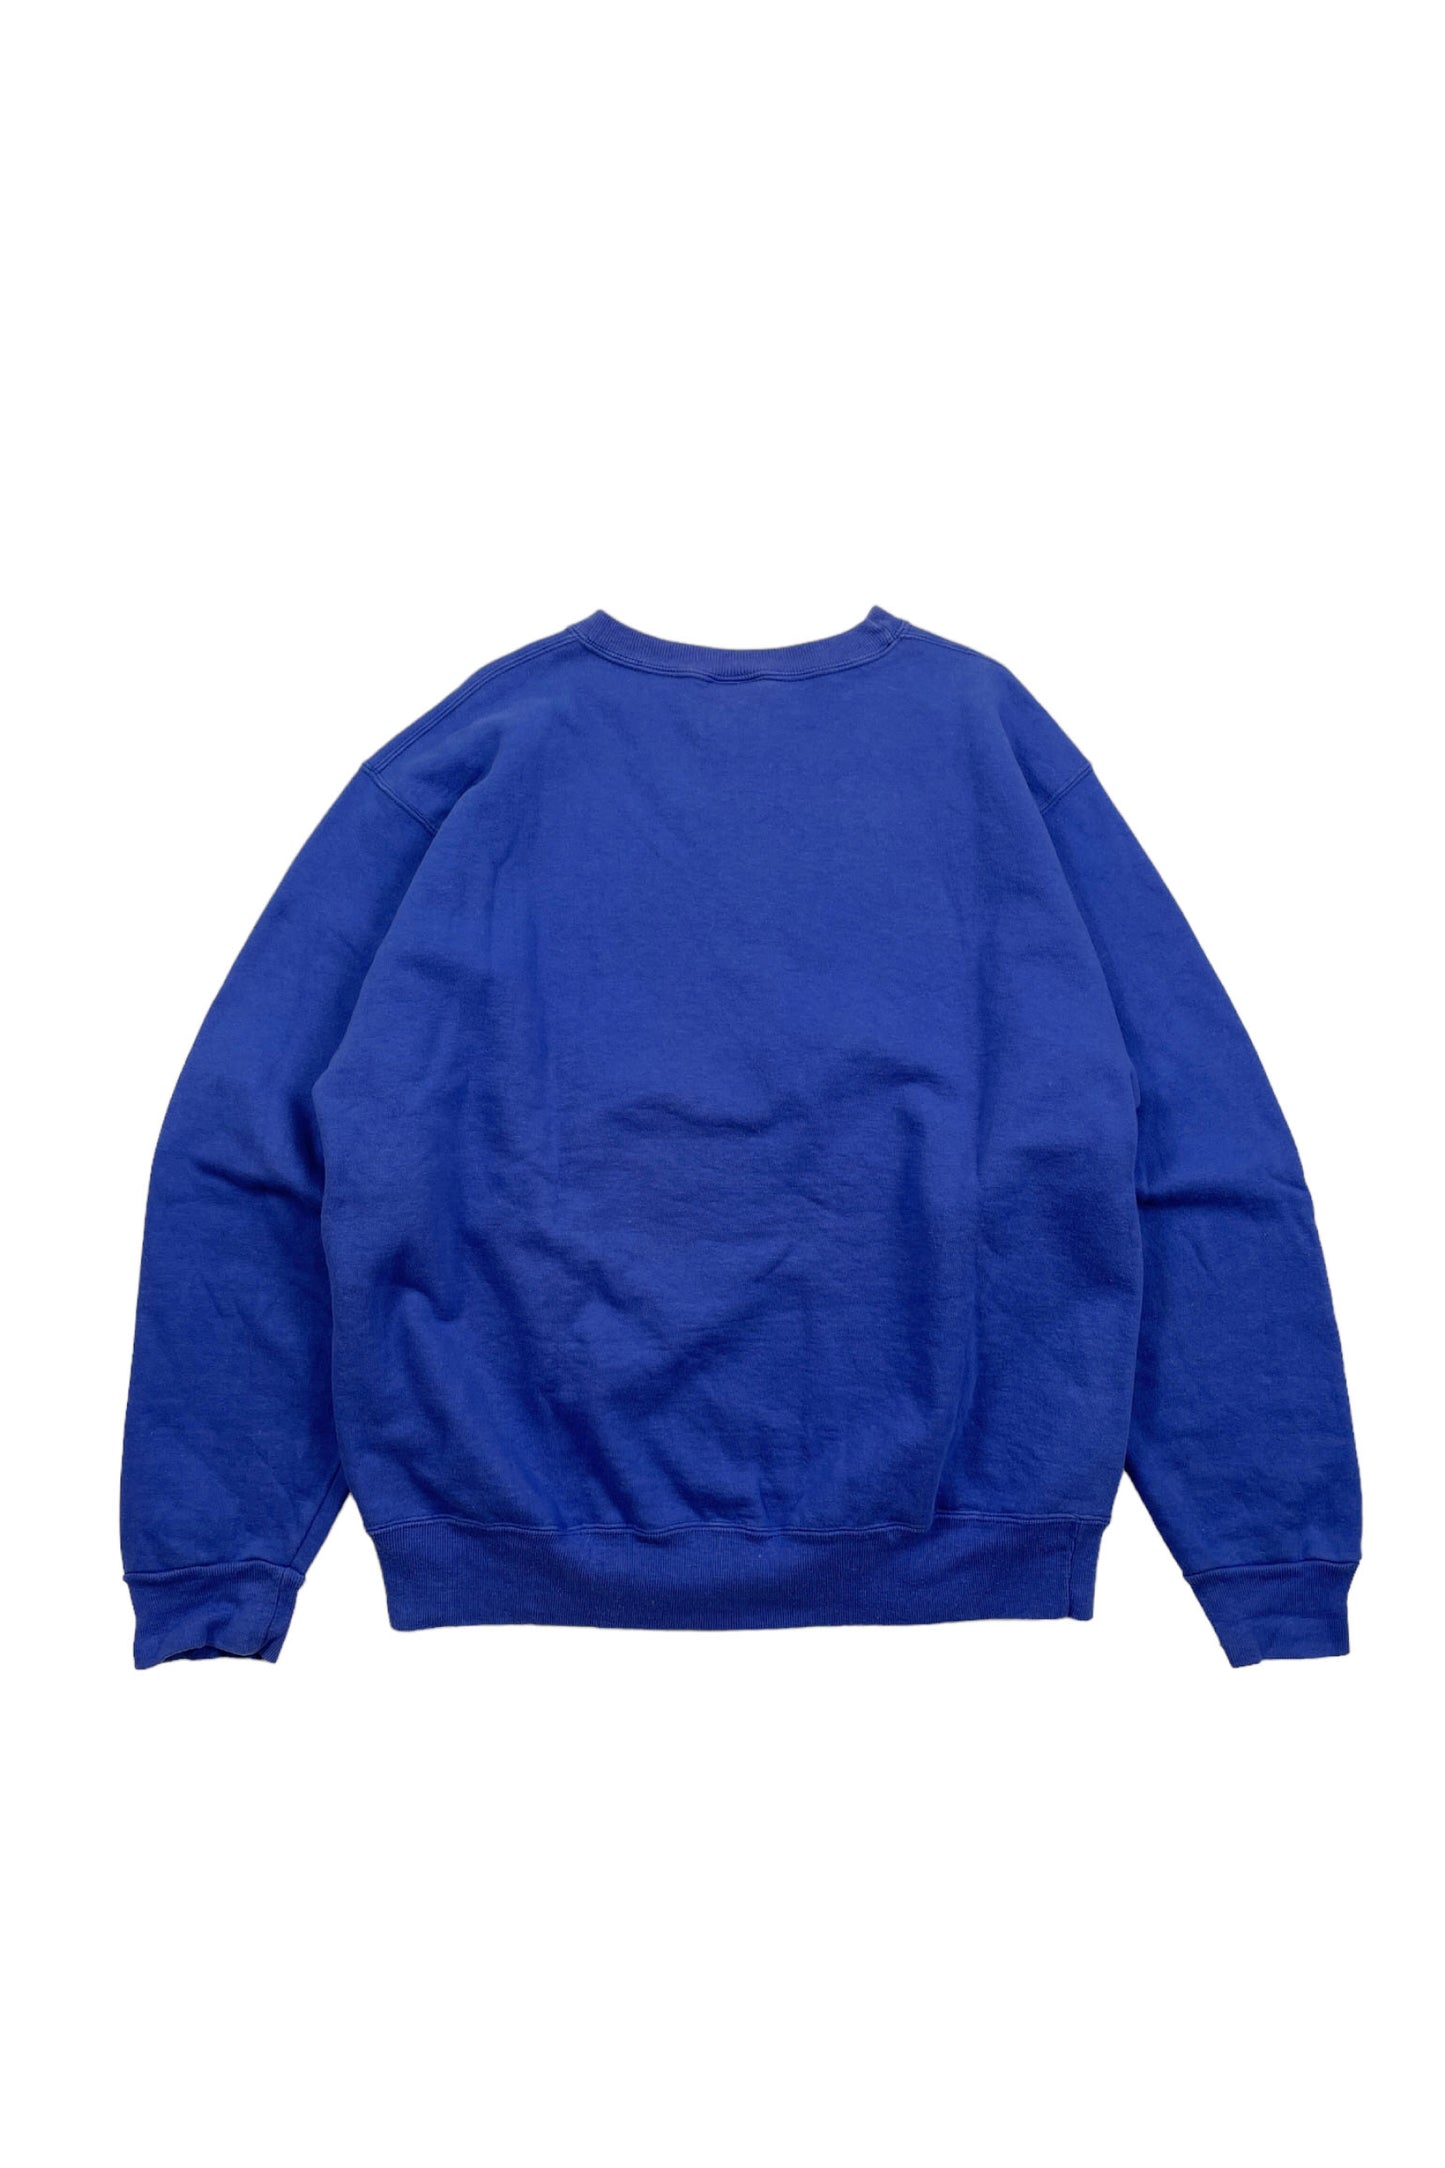 90's Made in USA Champion sweat blue